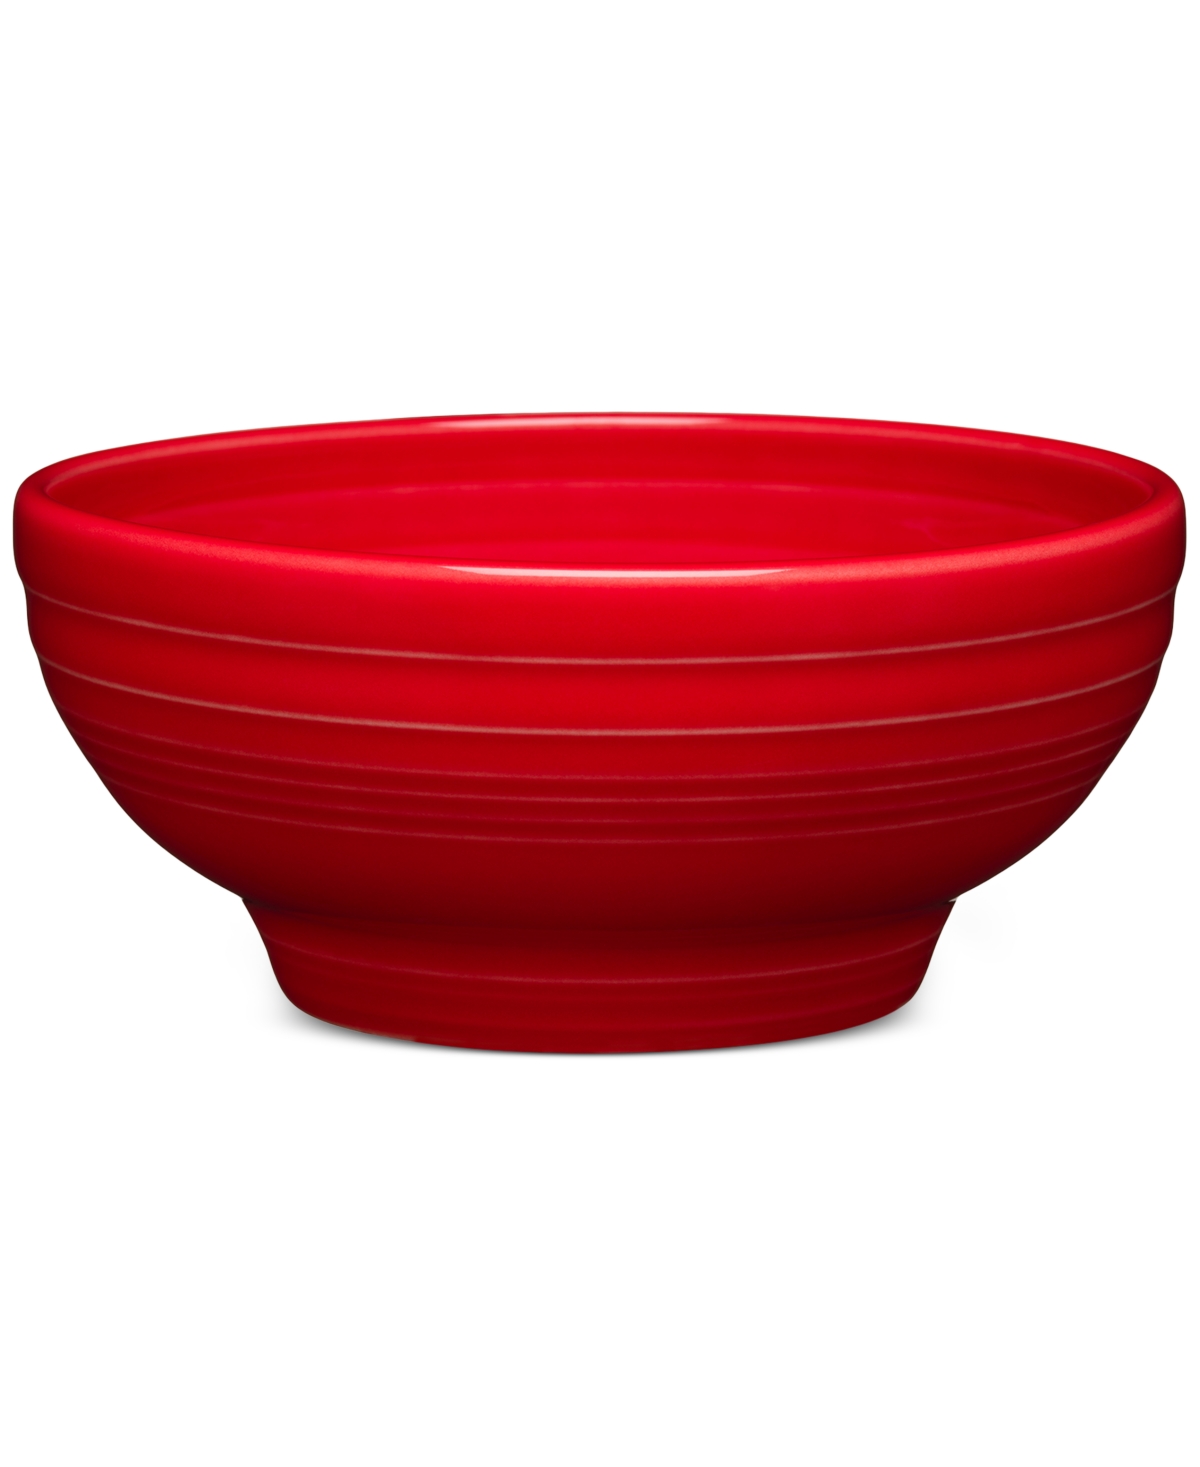 Small Footed Bowl 22 oz. - Peony